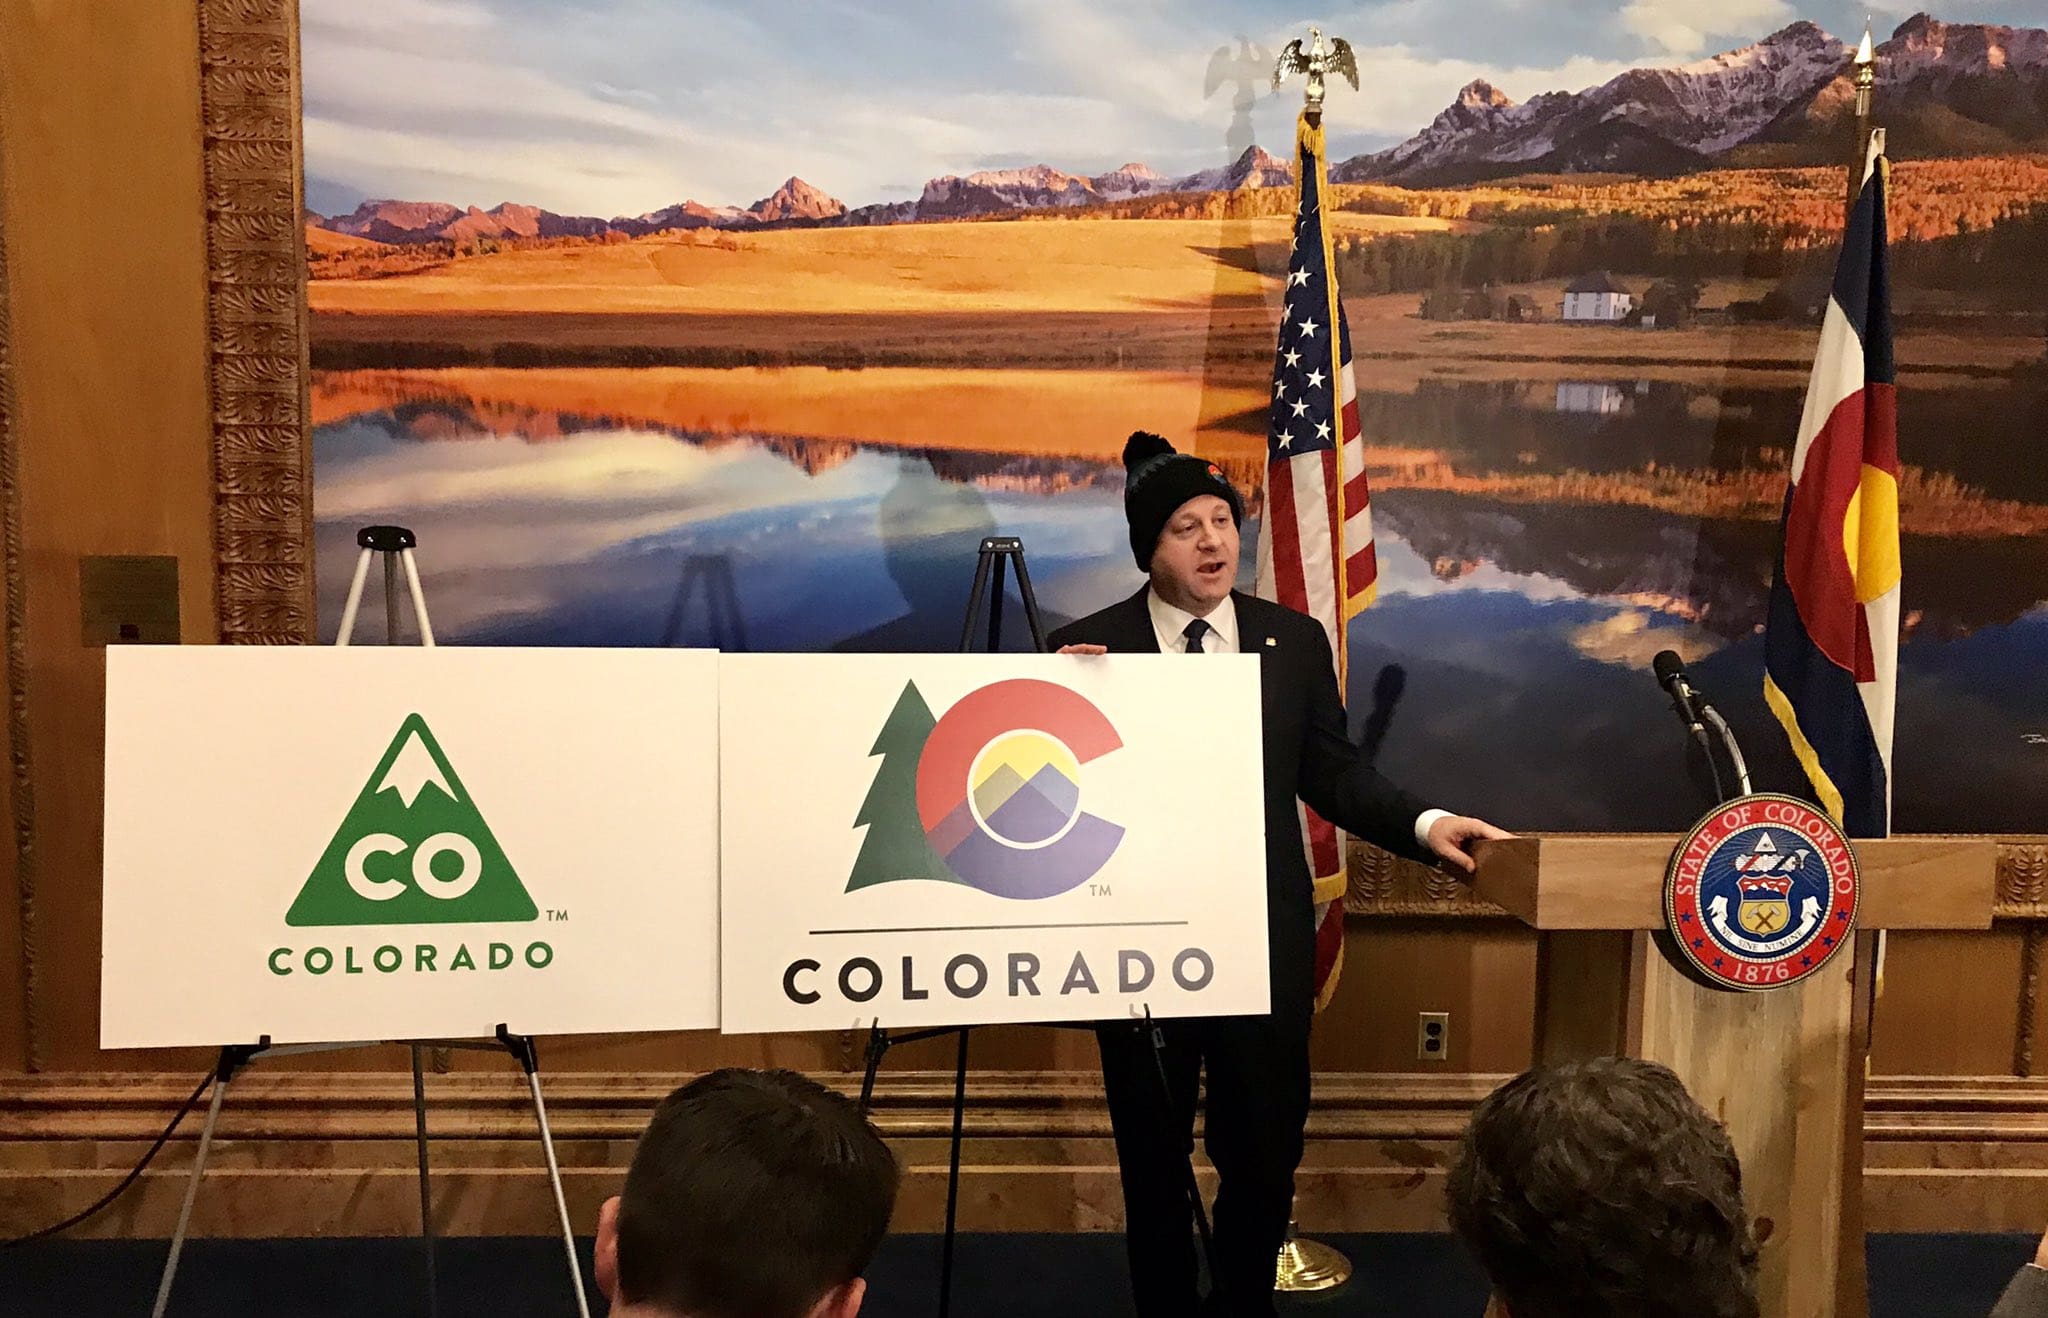 Colorado Governor Unveils New State Logo (Acknowledges Great Plains Not